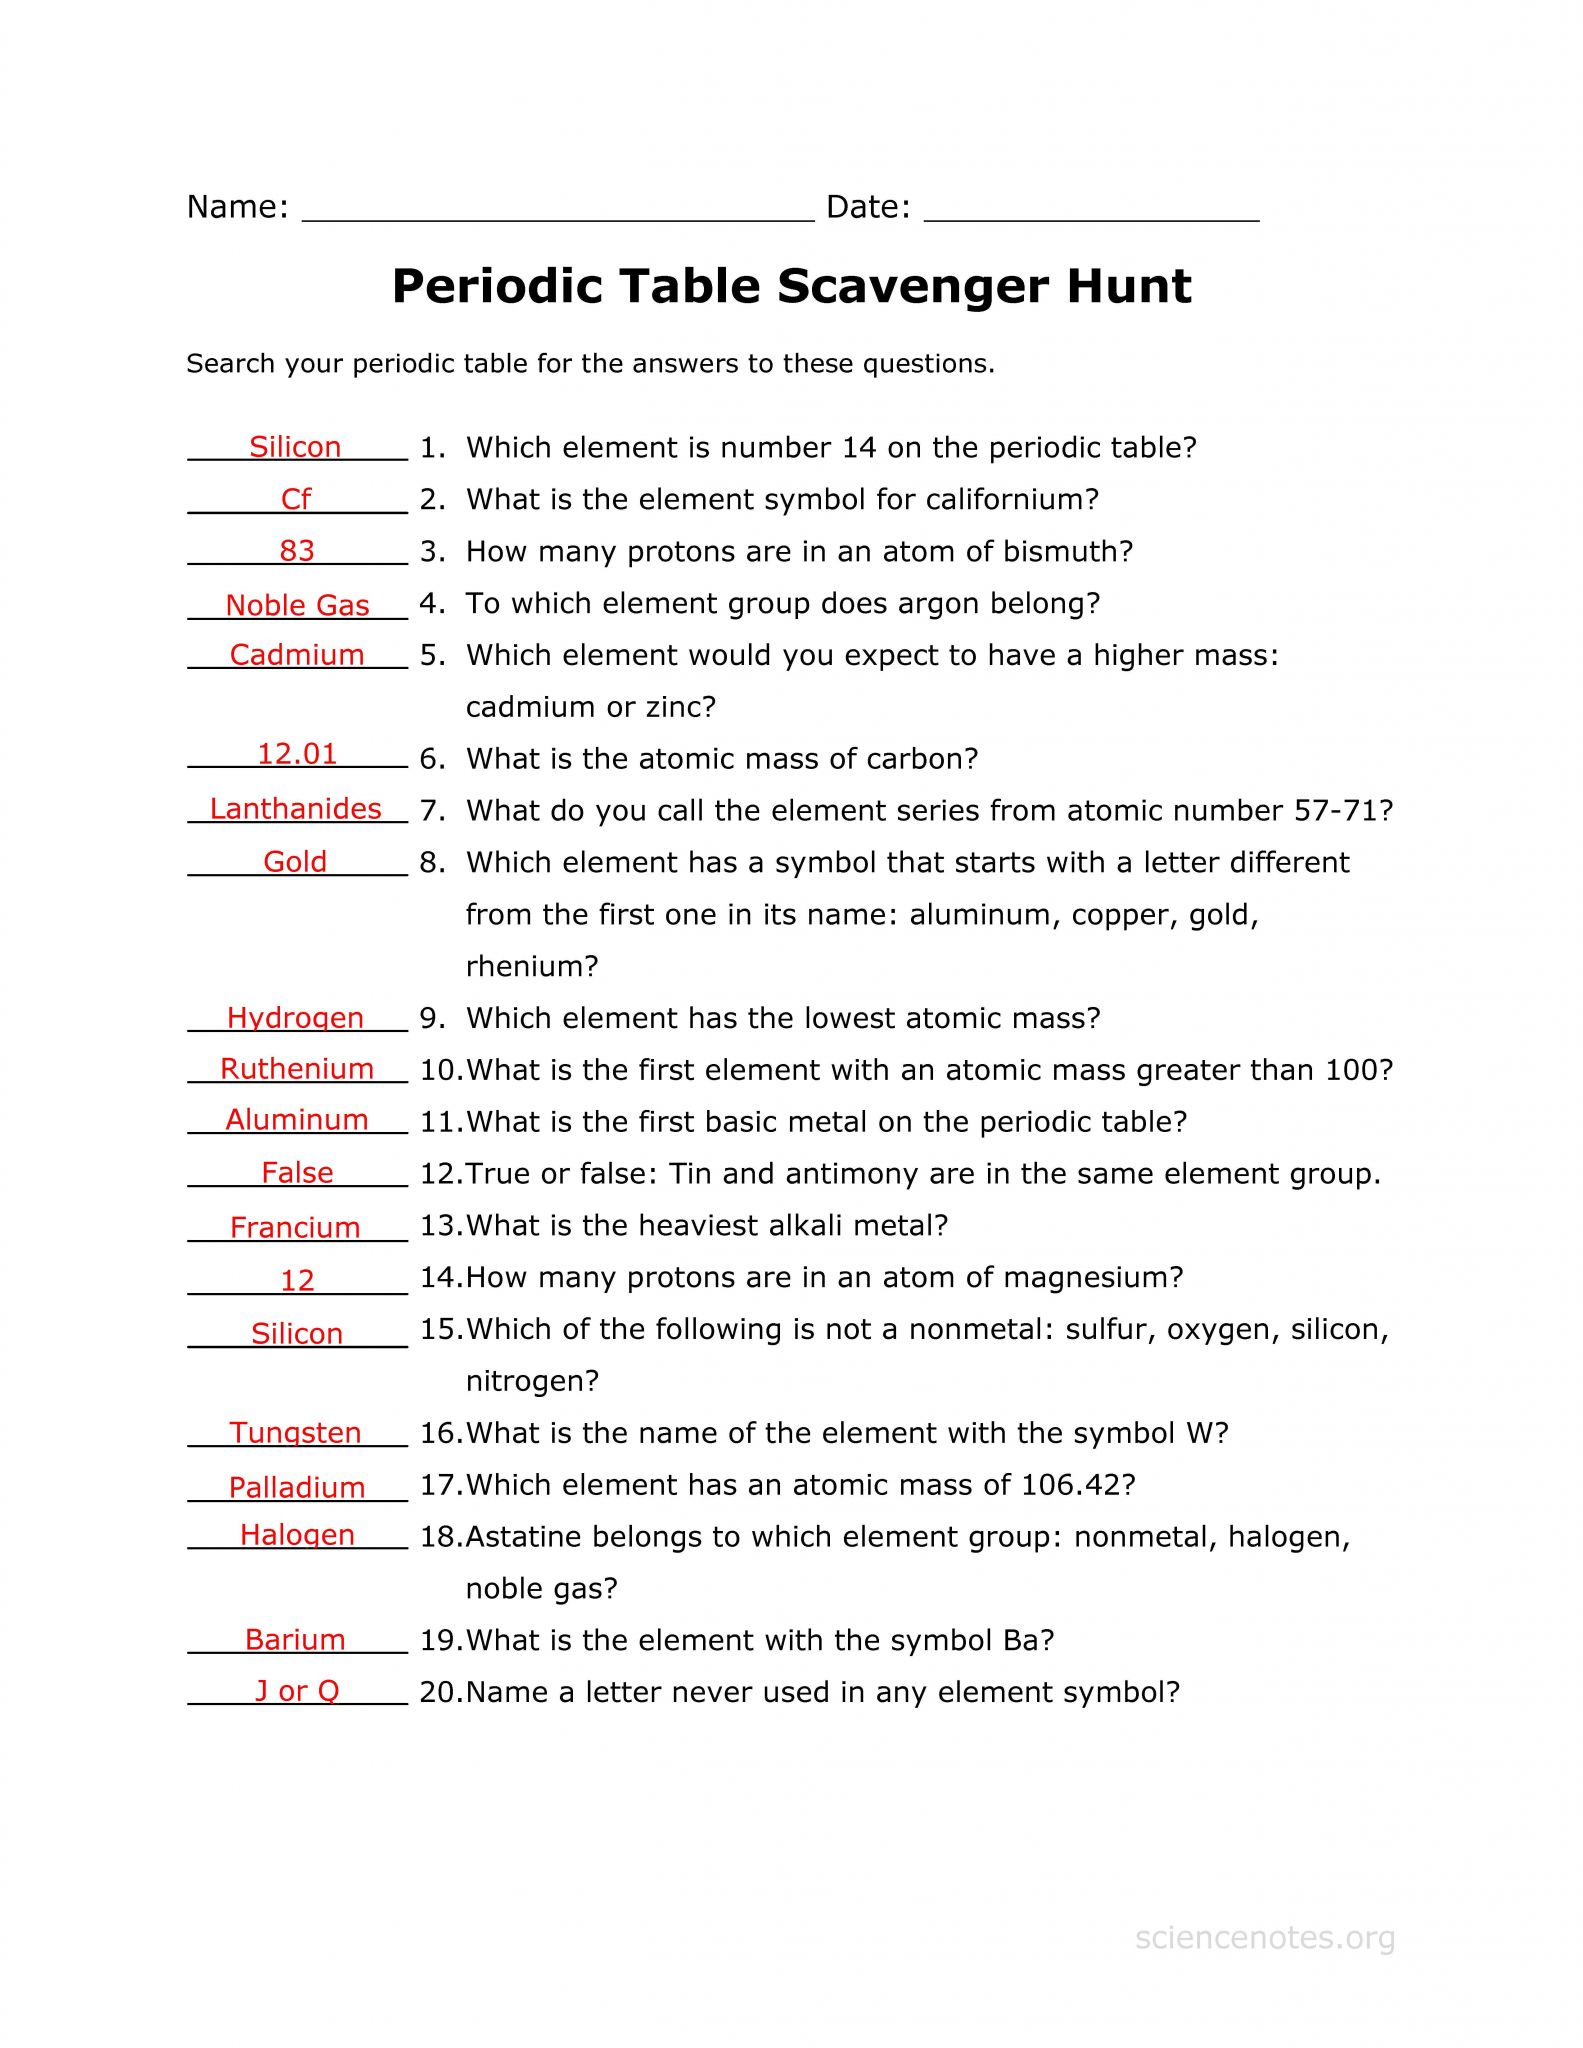 Worksheet 10 Metallic Bonds Answers and Answer Key to the Periodic Table Scavenger Hunt Worksheet Related